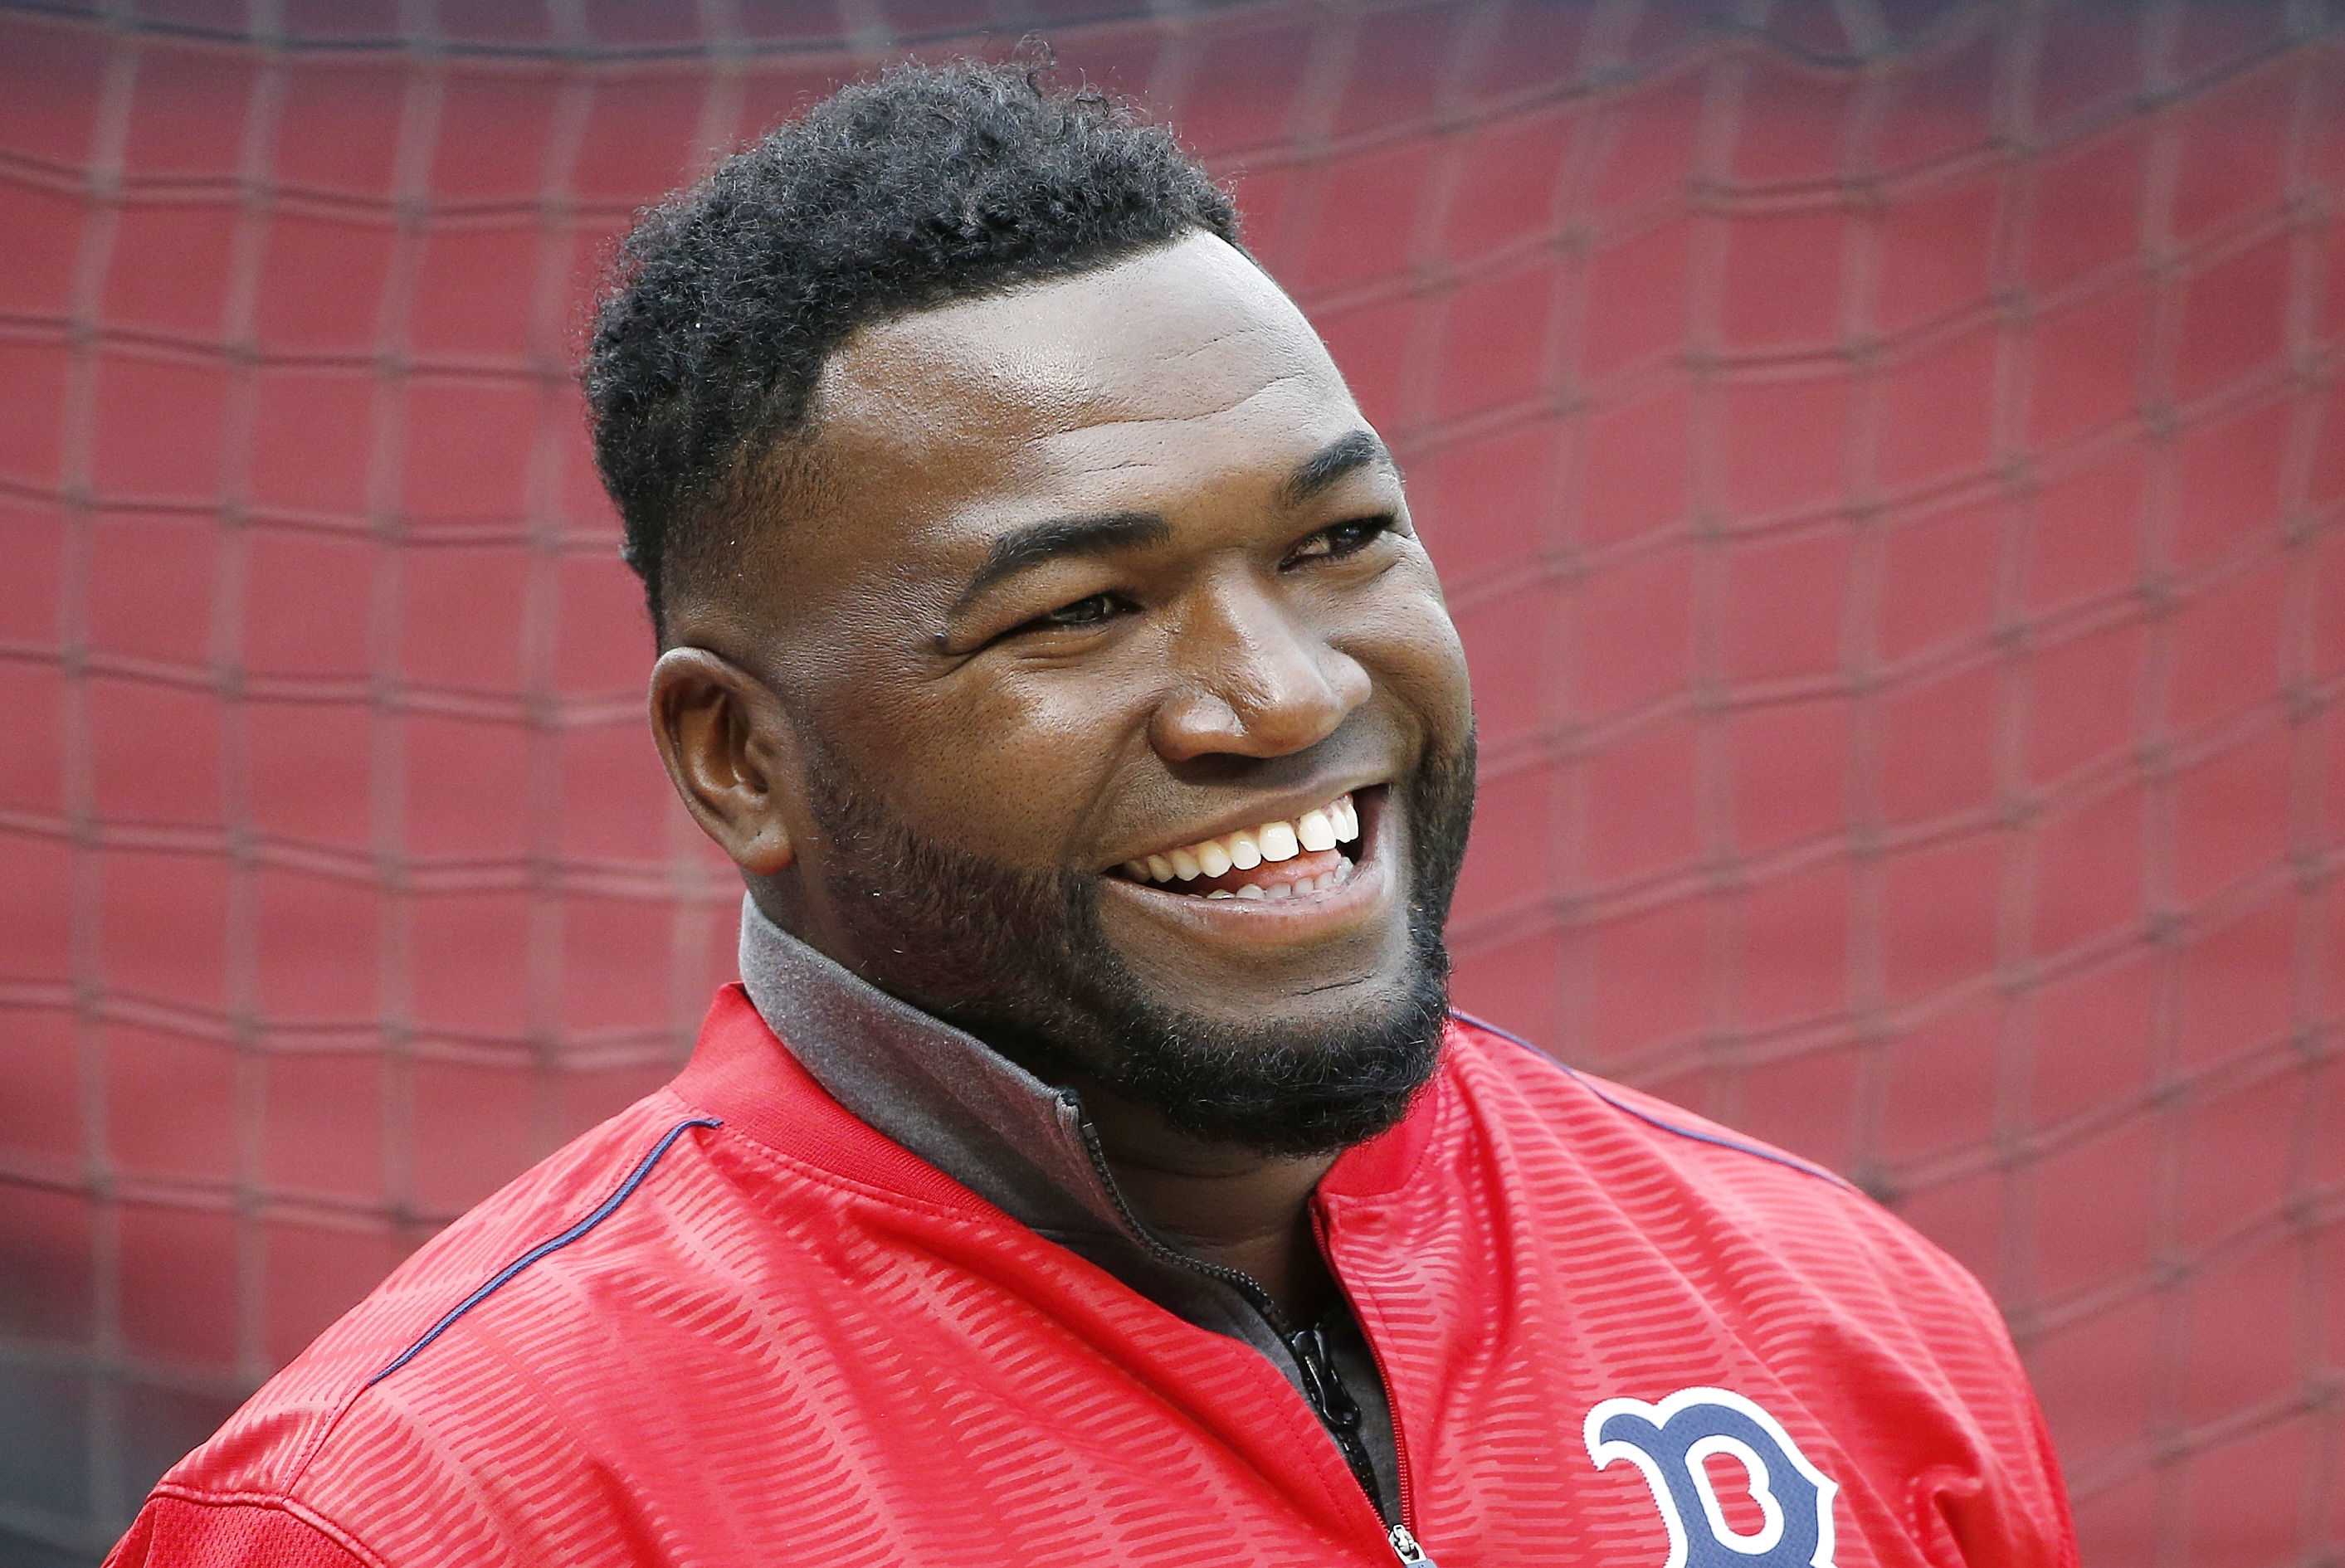 Red Sox legend Ortiz stable after shooting in DR